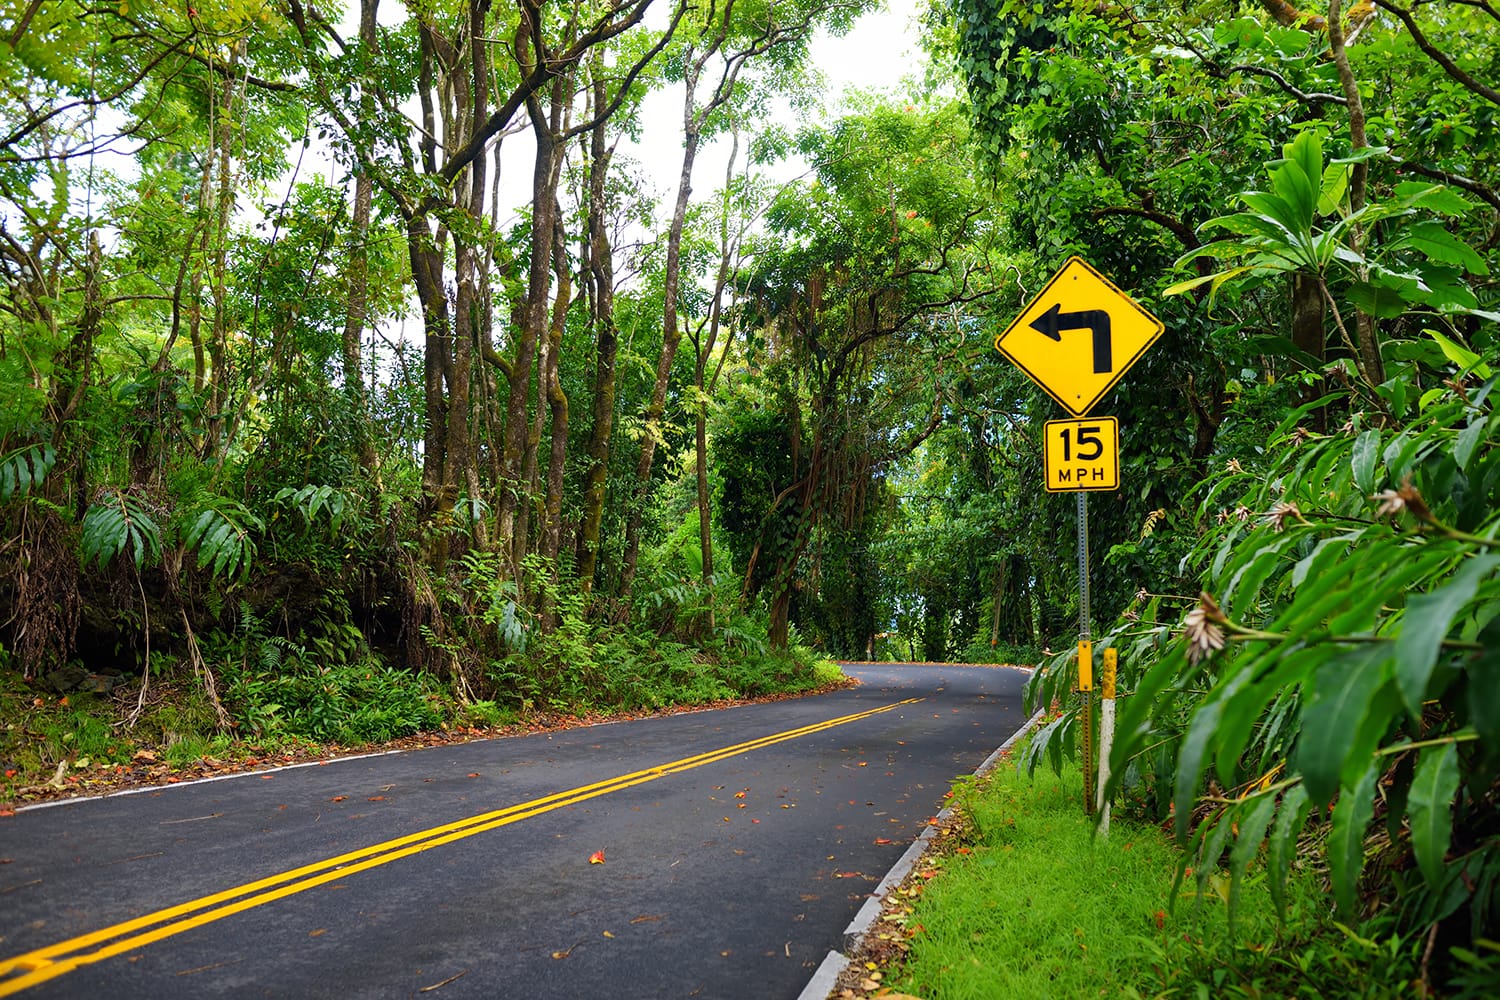 Famous Road to Hana fraught with narrow one-lane bridges, hairpin turns and incredible island views, curvy coastal road with views of cliffs, beaches, waterfalls, and miles of rainforest. Maui, Hawaii